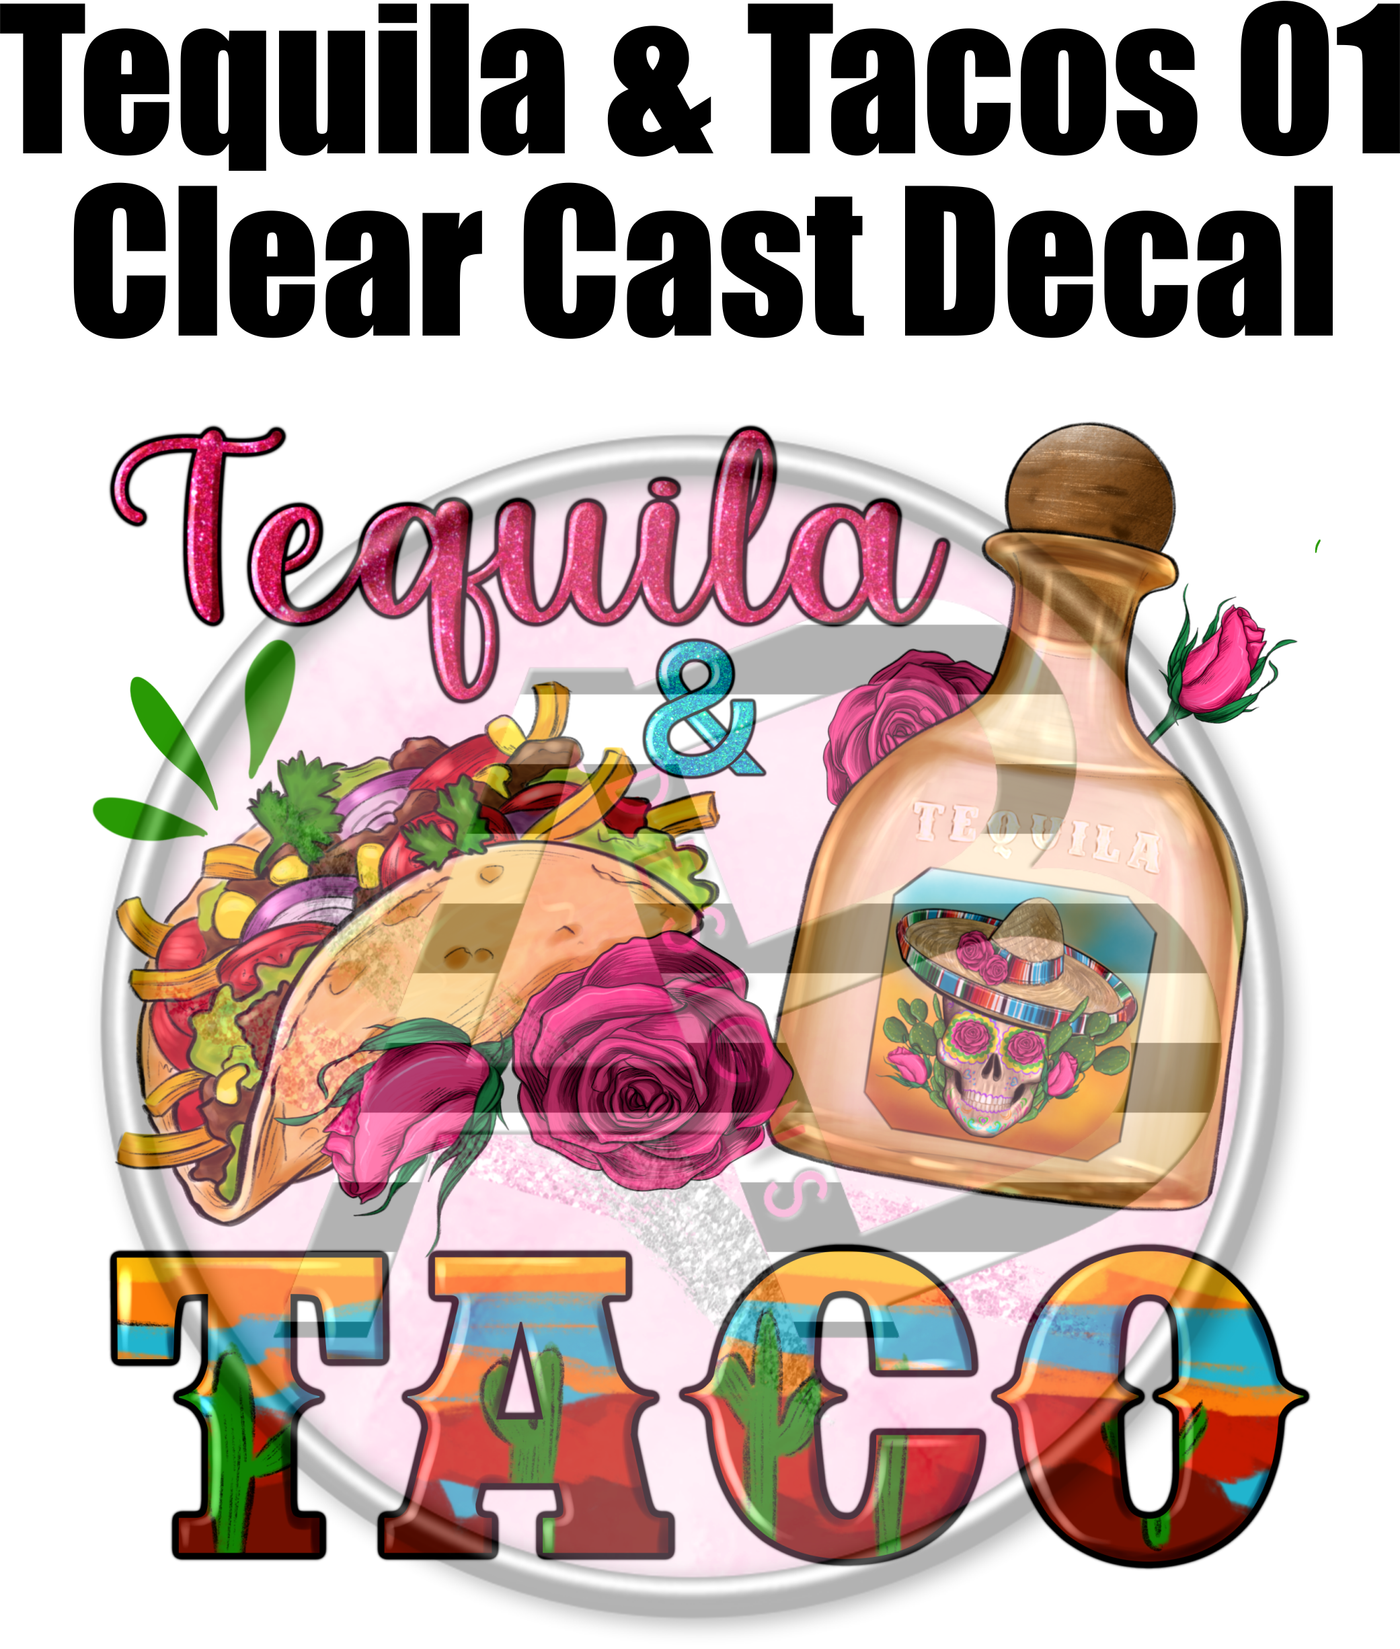 Tequila & Tacos 01 - Clear Cast Decal